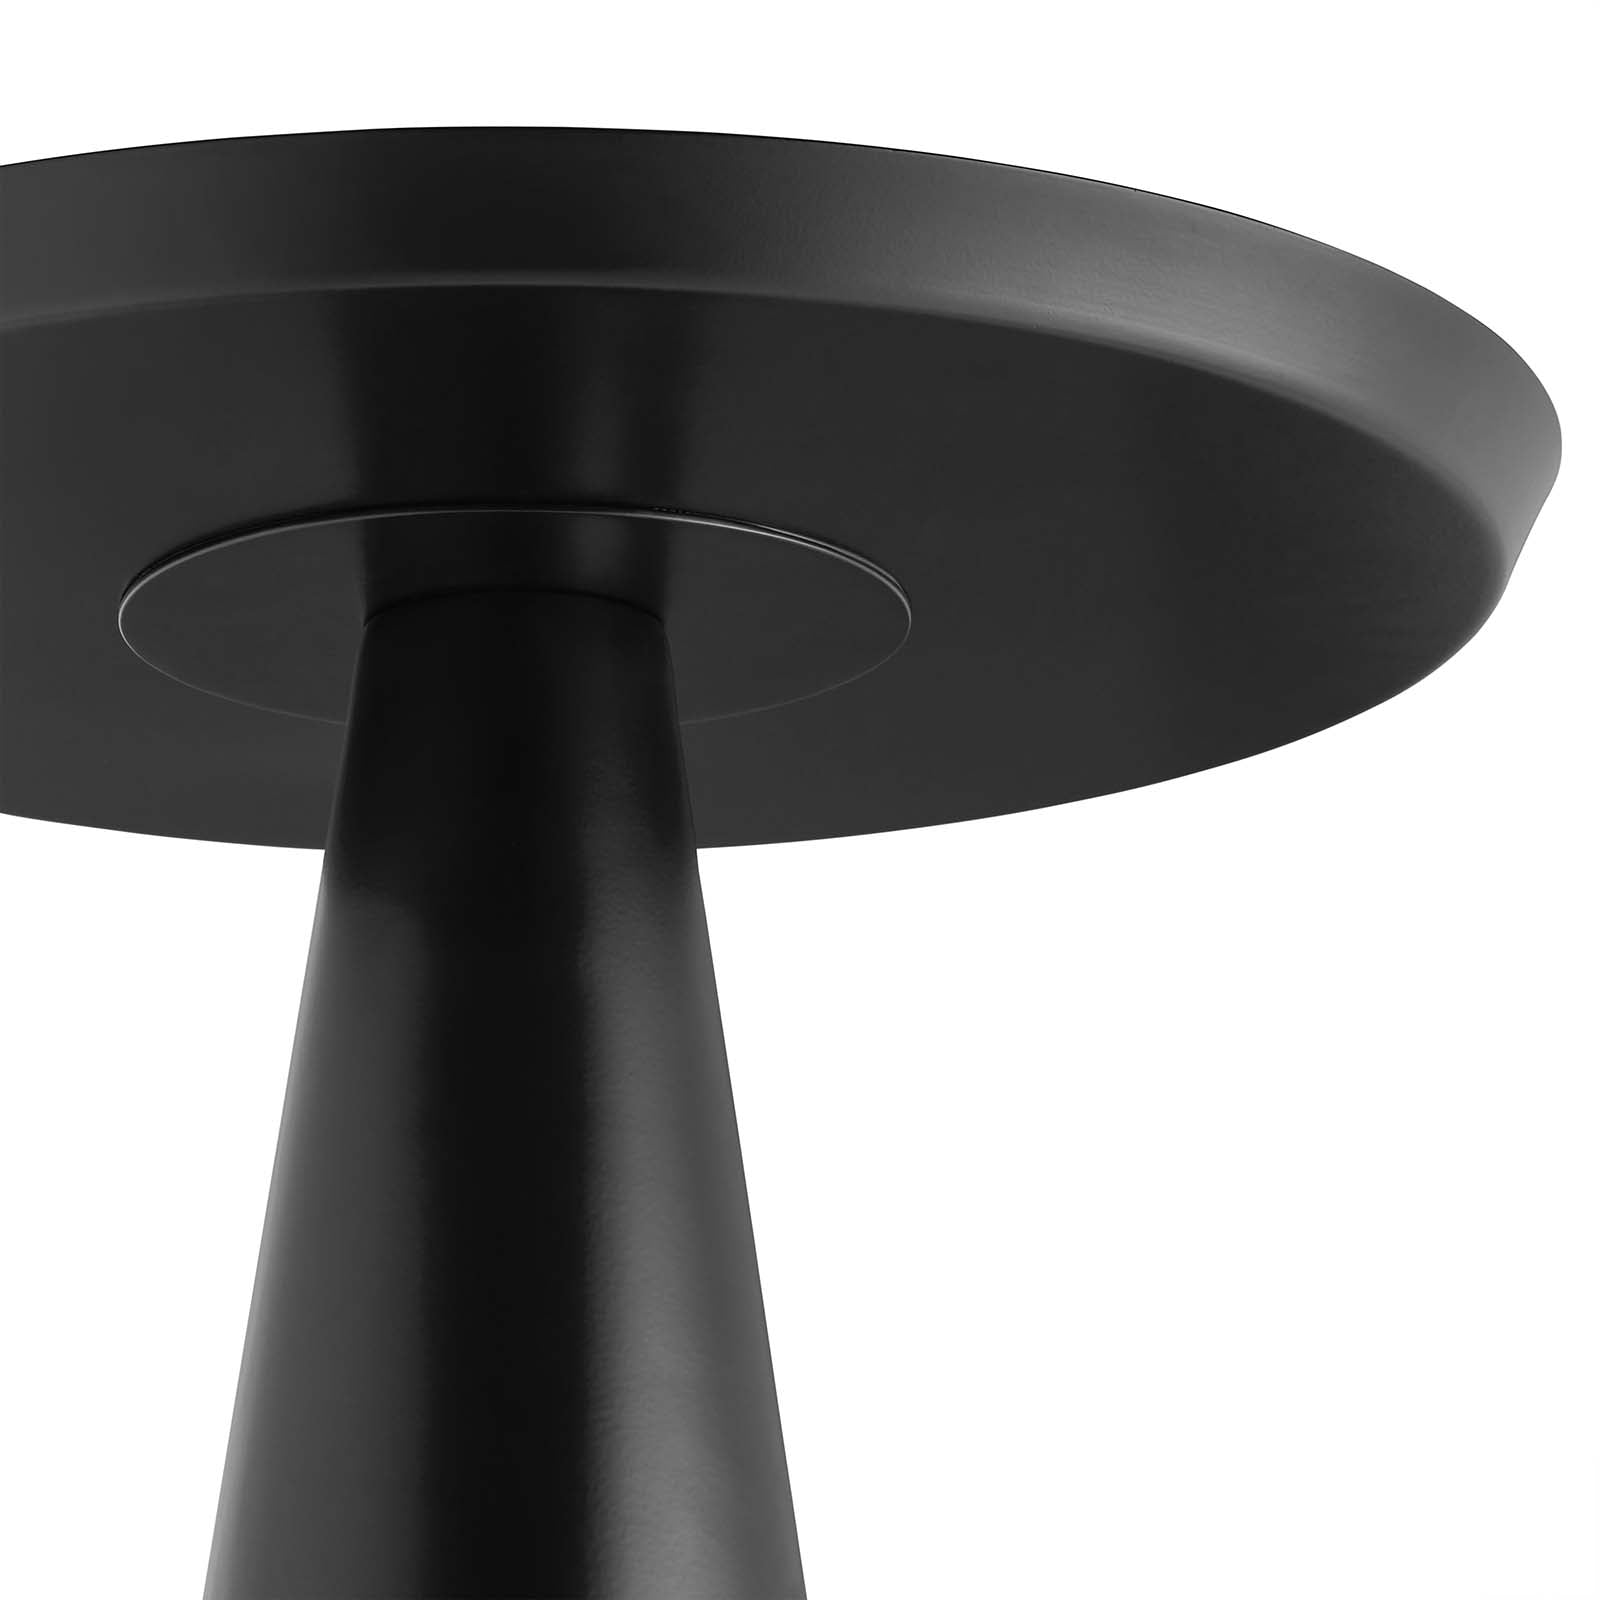 Maren Round Side Table - East Shore Modern Home Furnishings